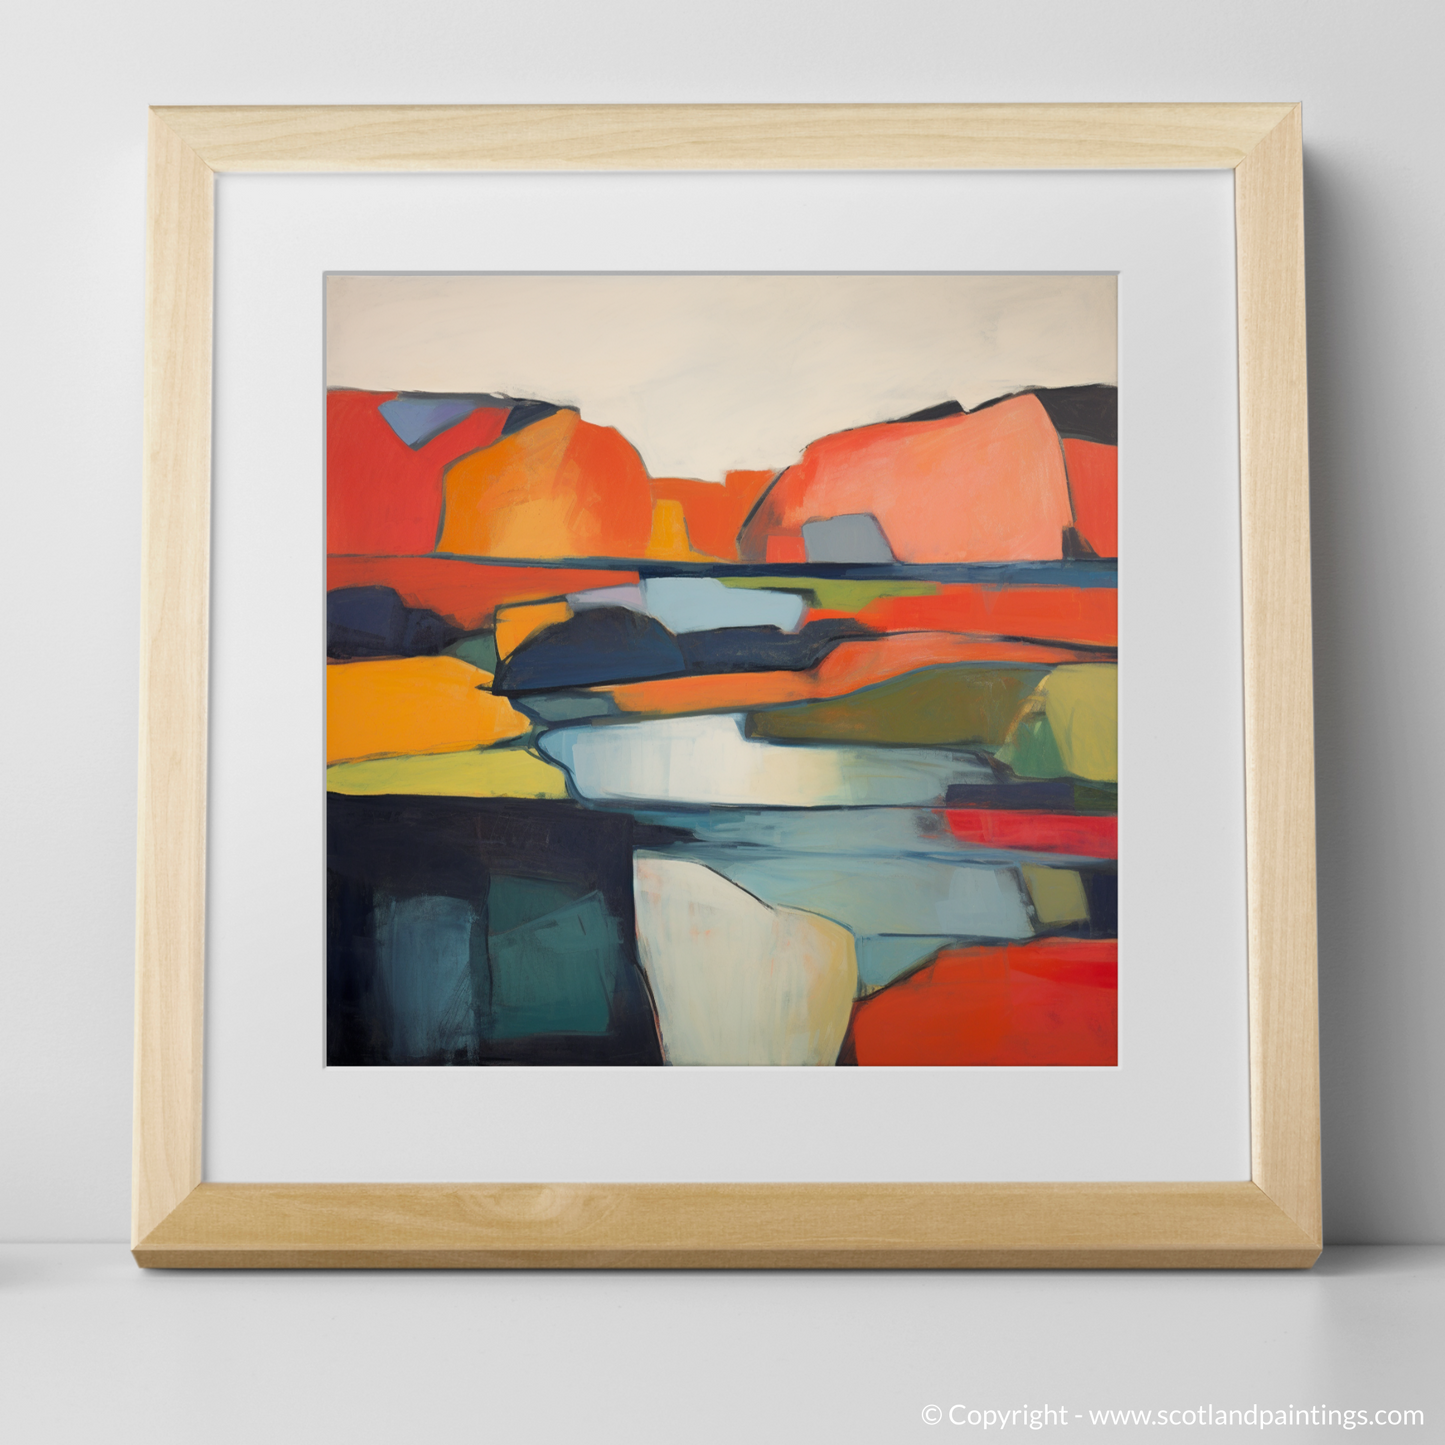 Art Print of A loch in Scotland with a natural frame